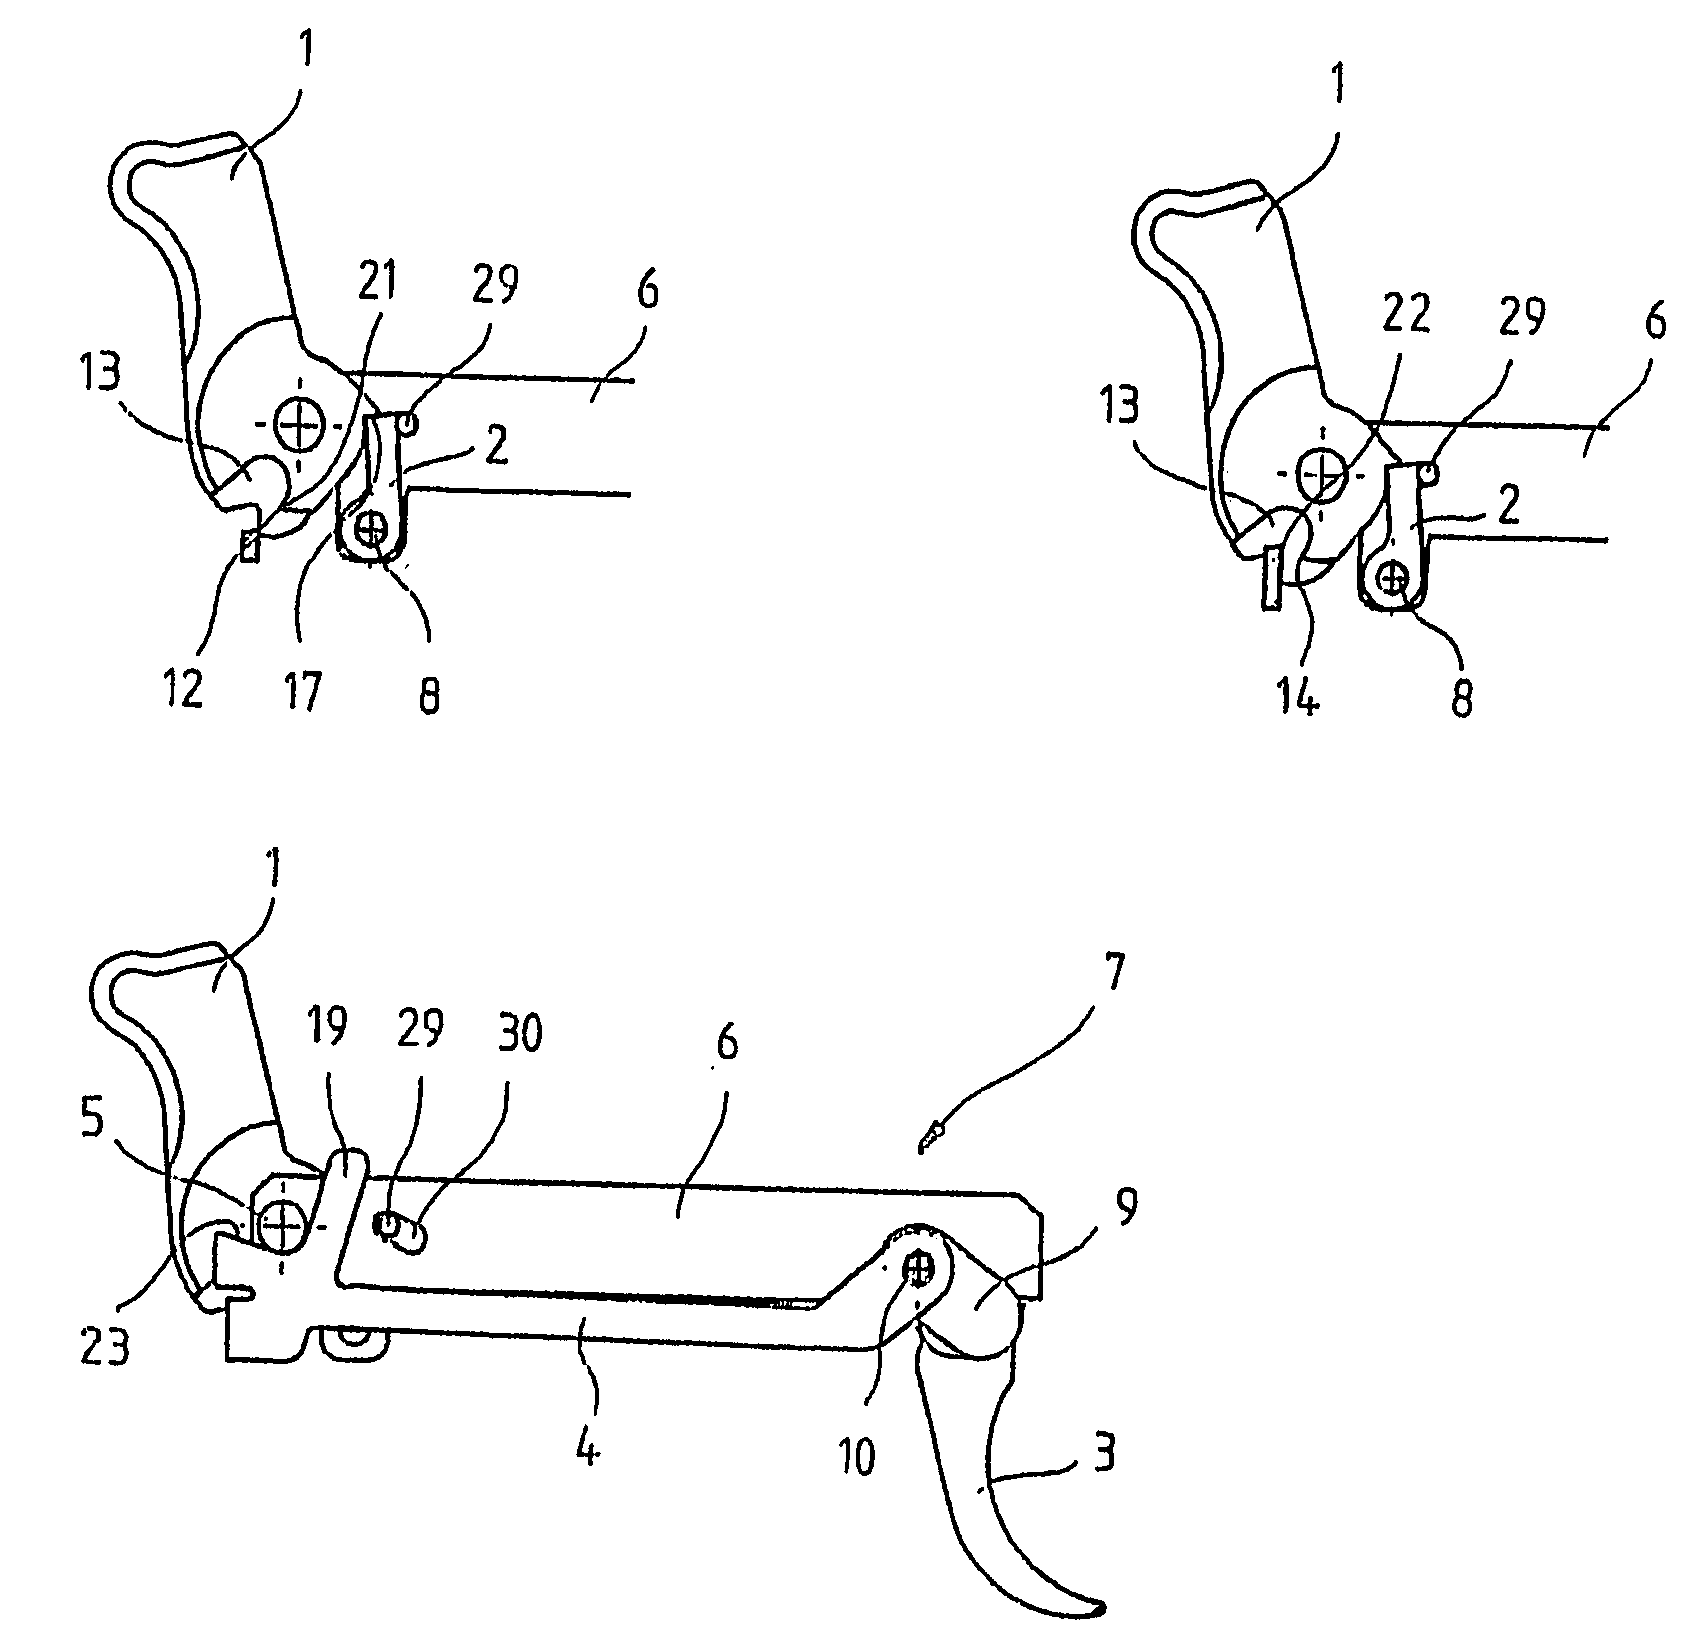 Trigger system for small arms